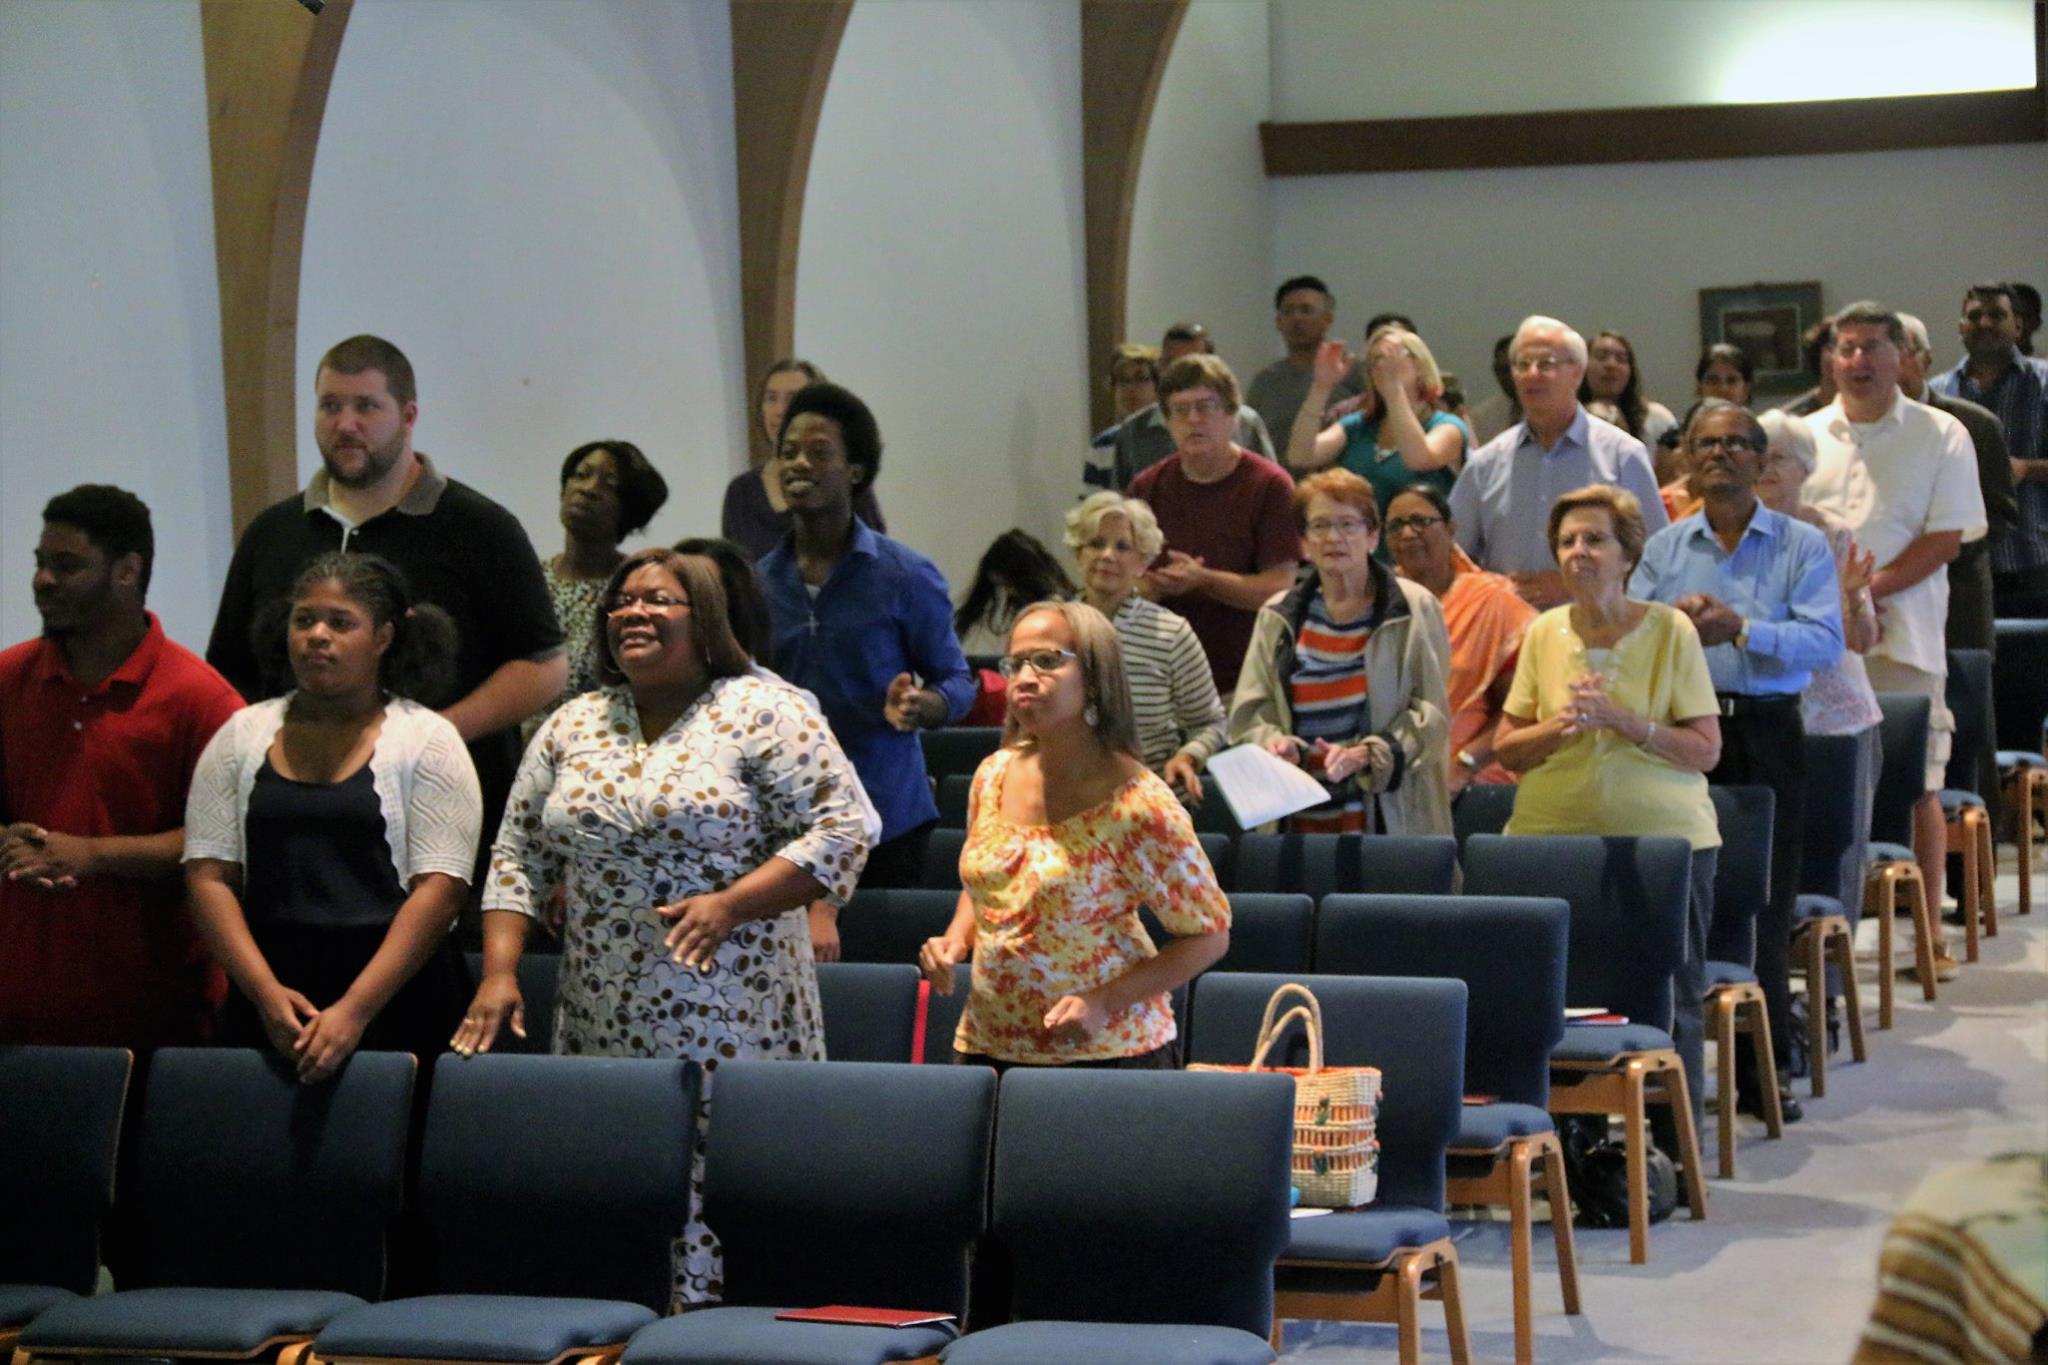 The congregation, which includes 13 nationalities, gathers for worship at Centenary UMC in Metuchen, New Jersey.